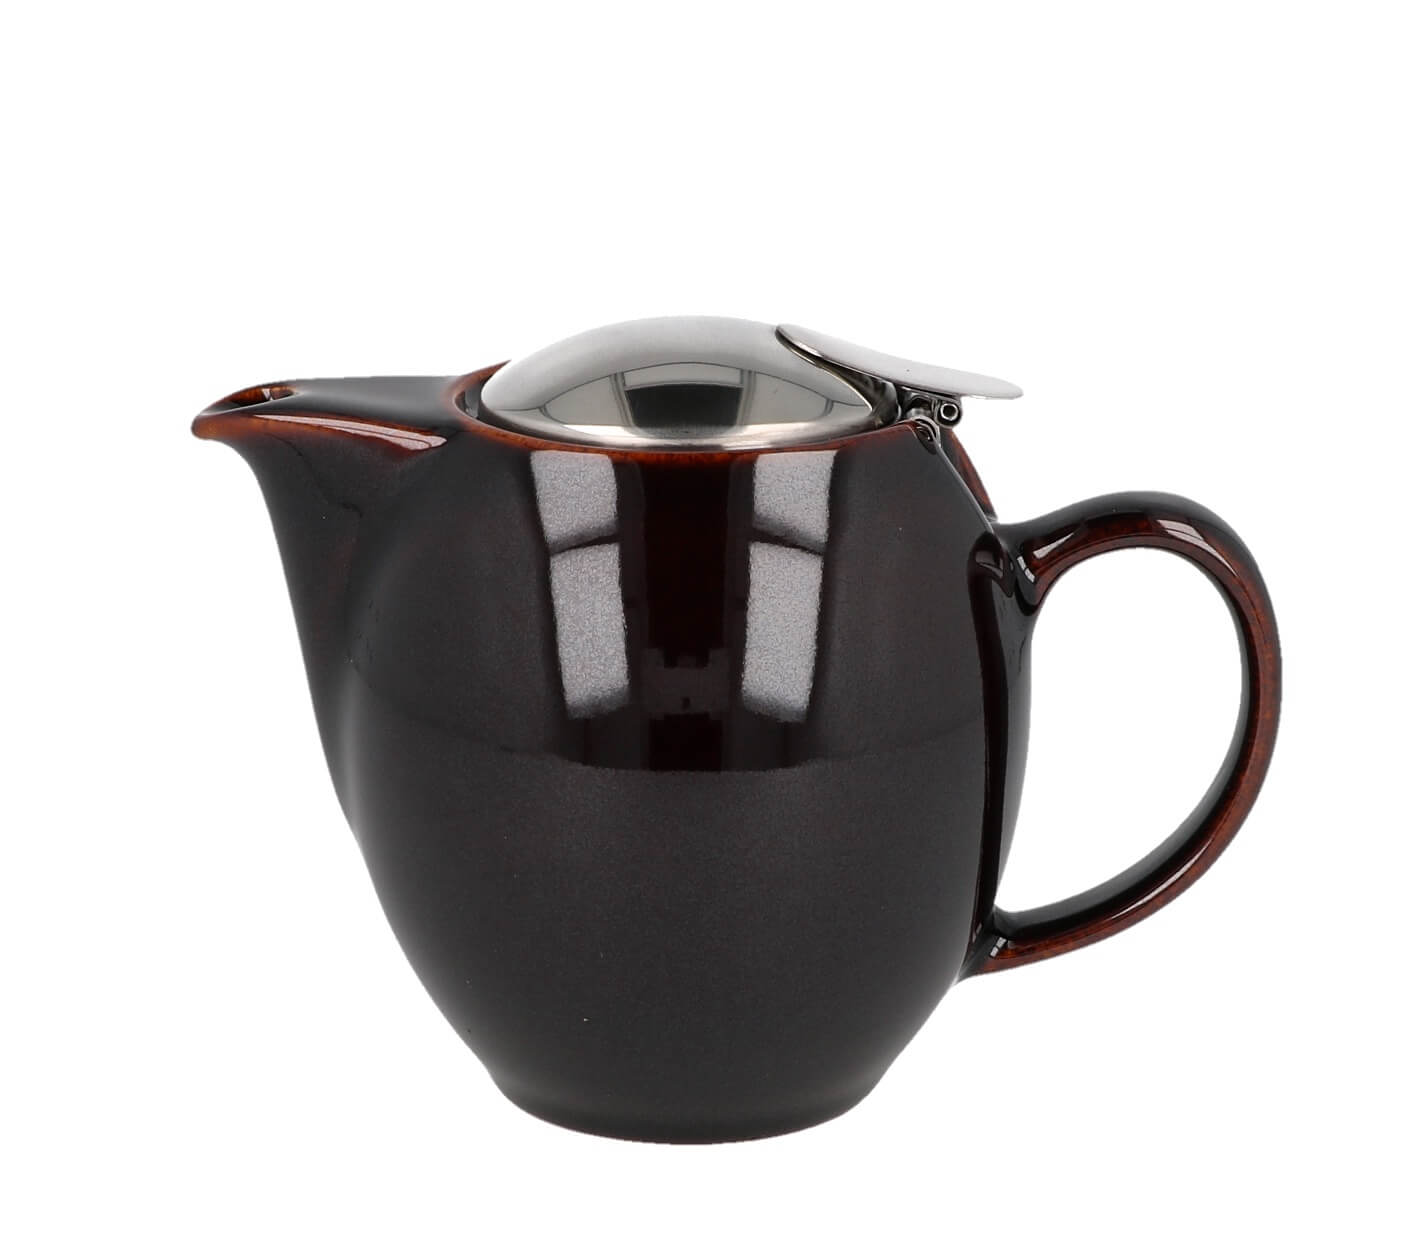 Sideview of the antique brown-colored ZERO JAPAN teapot, with 350 ml capacity